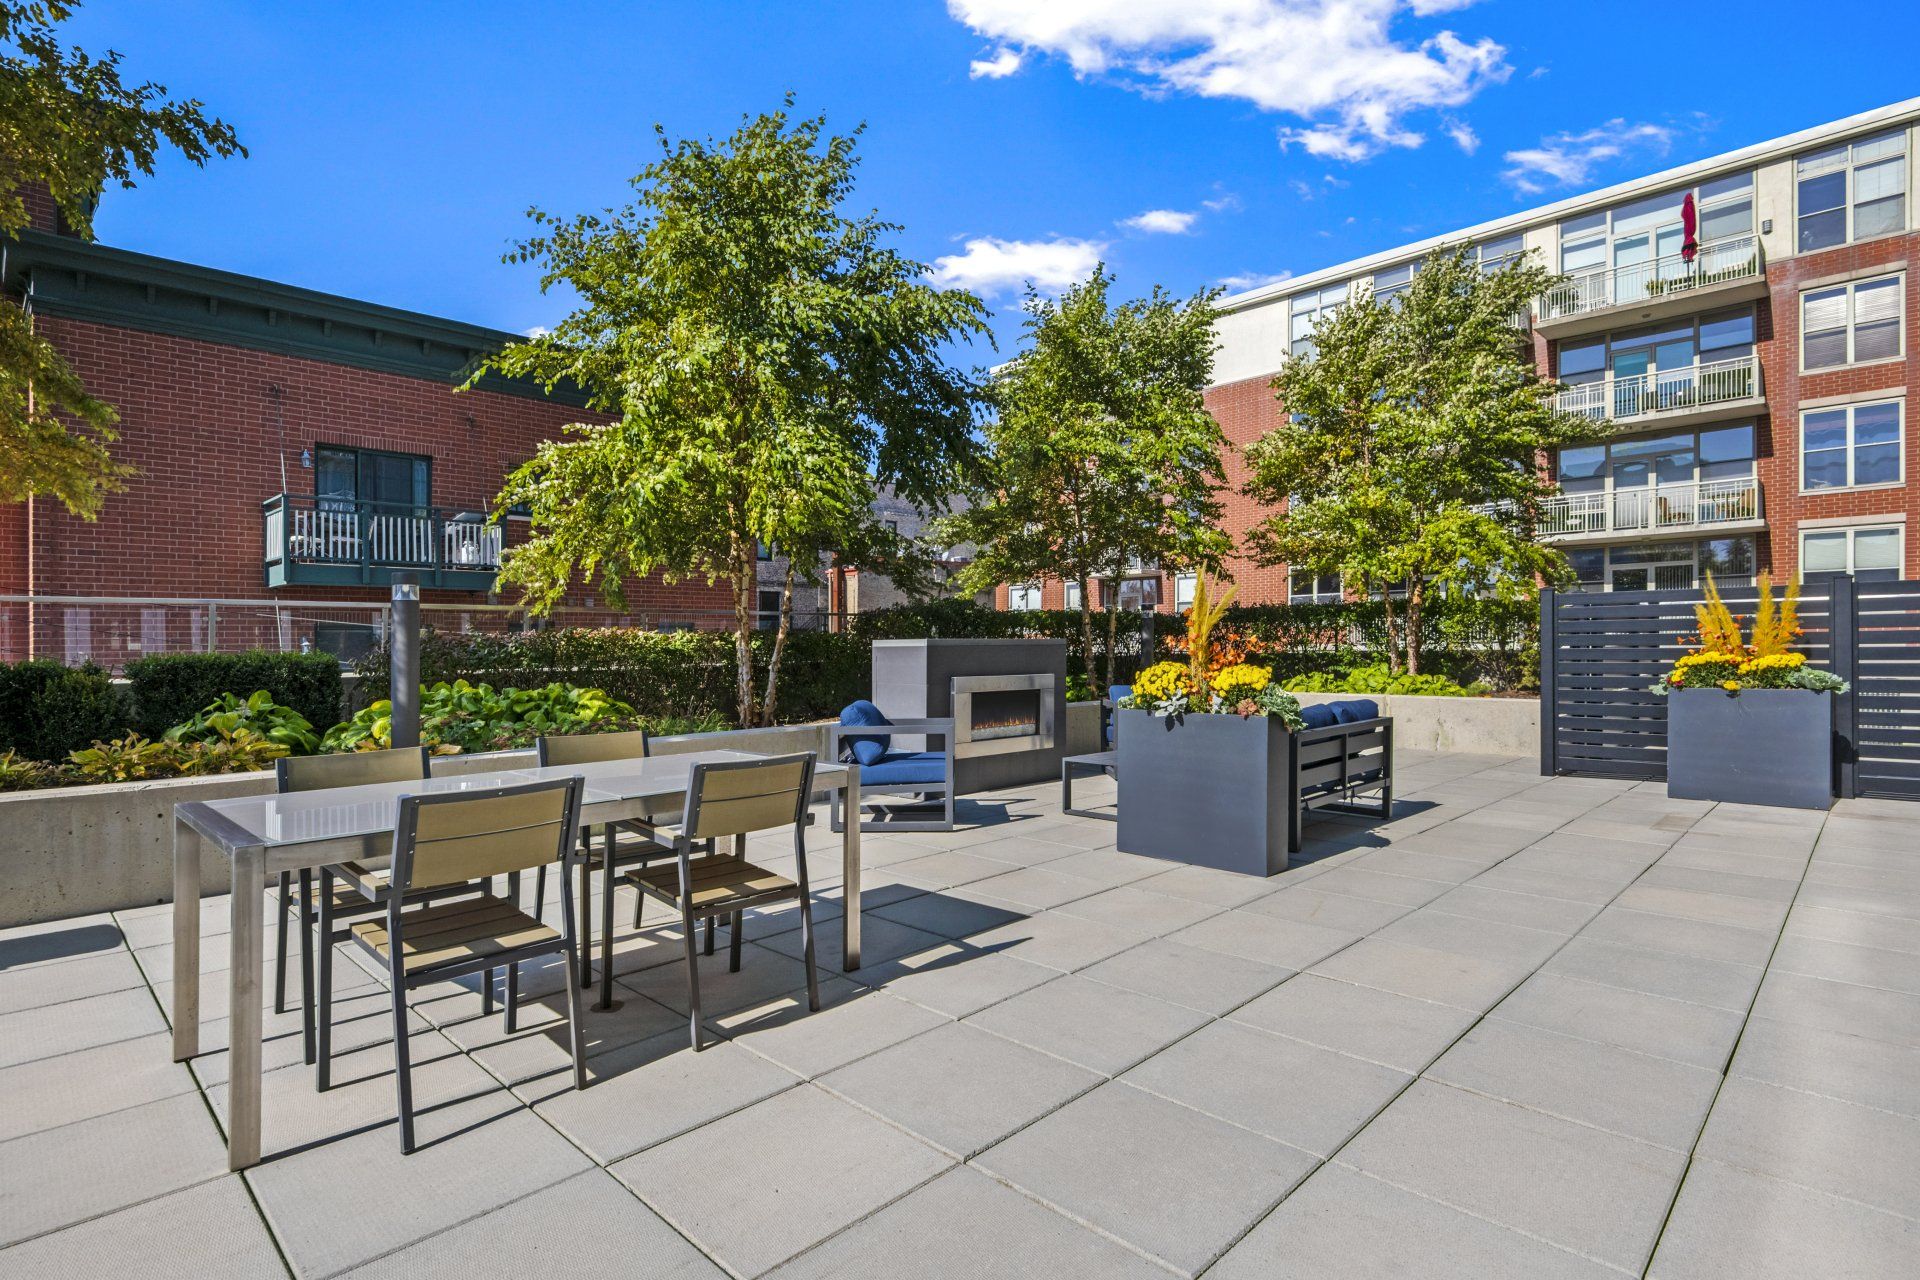 A patio with a table and chairs in front of a building at 24 S Morgan Apartments.